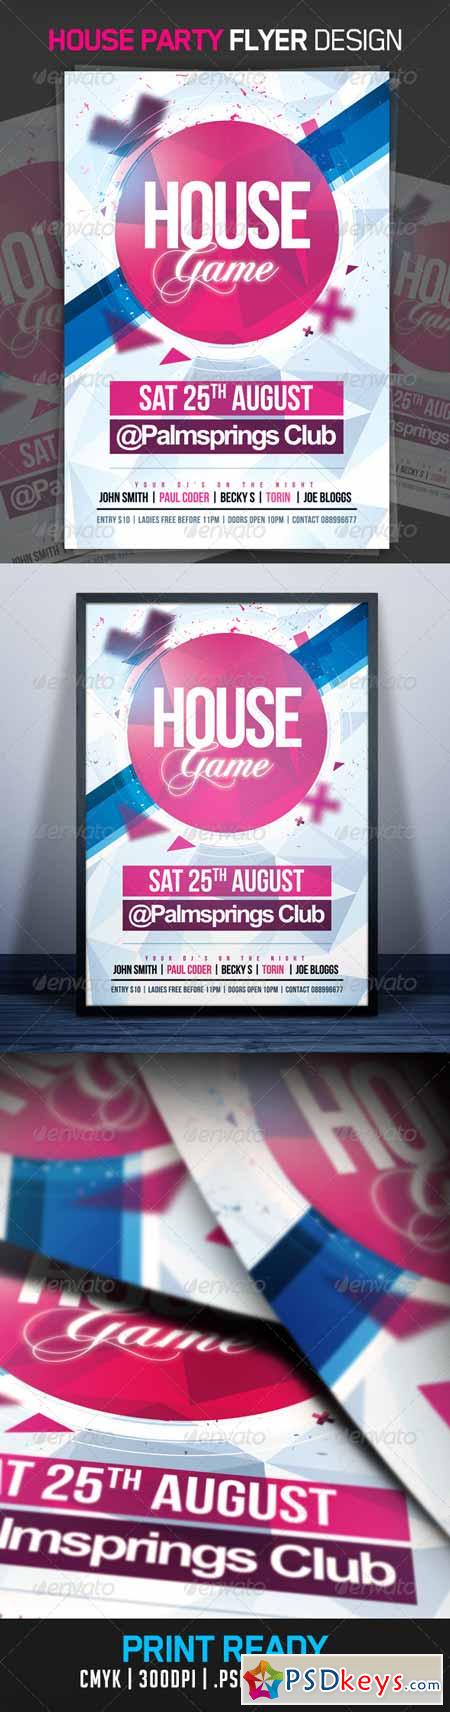 House Game Party Flyer 4832093